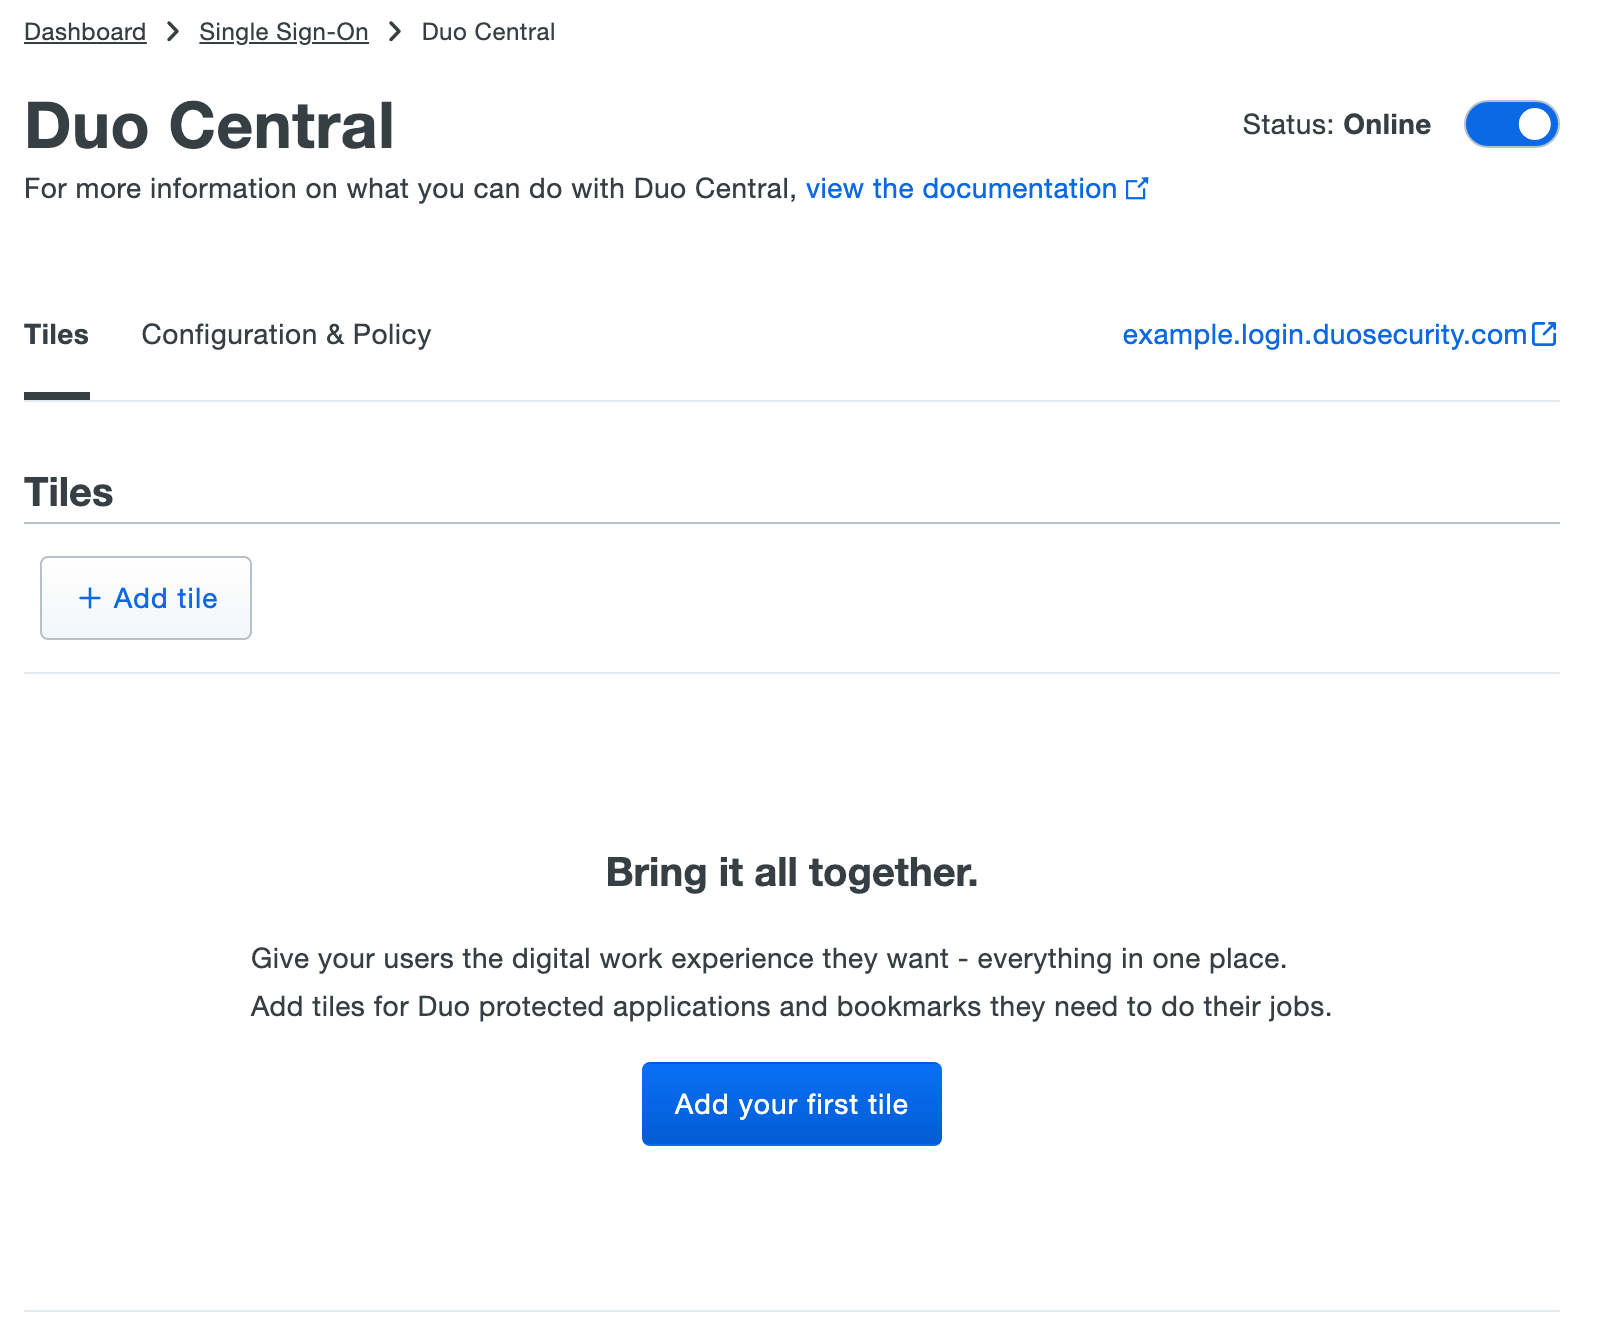 Duo Central Tiles tab